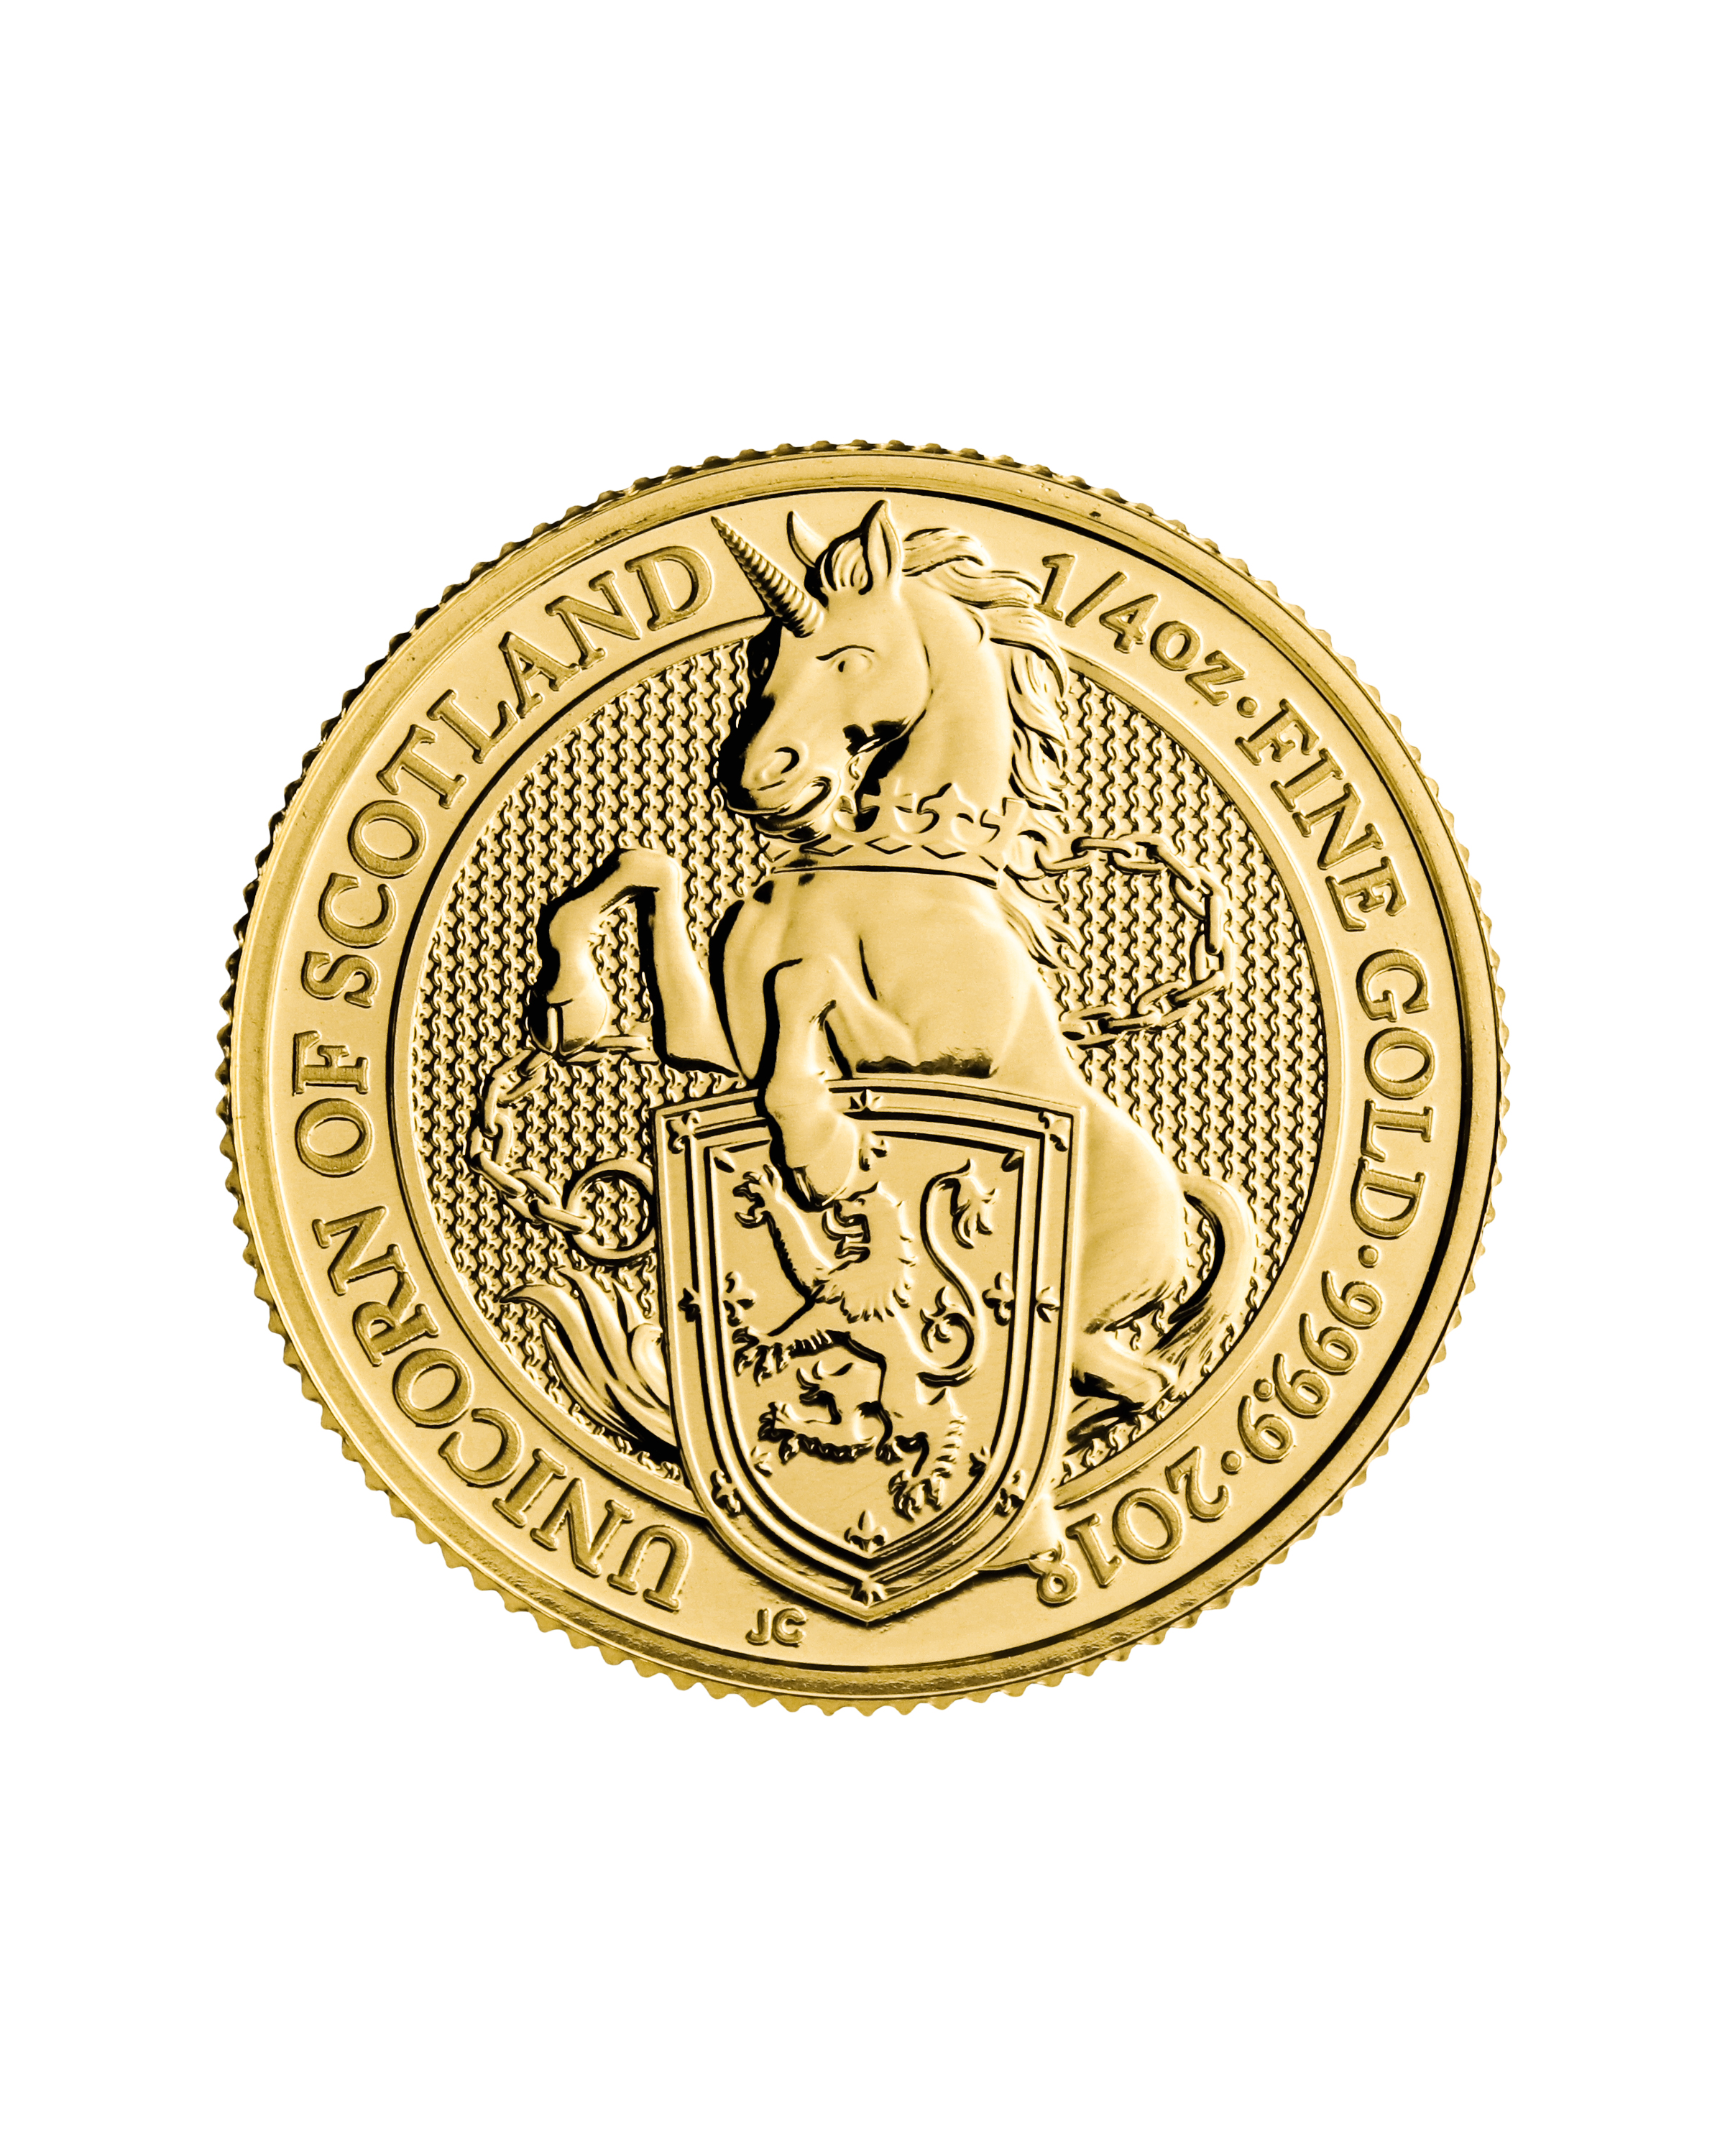 The Queens Beasts 2018 The Unicorn 1/4oz Gold Coin